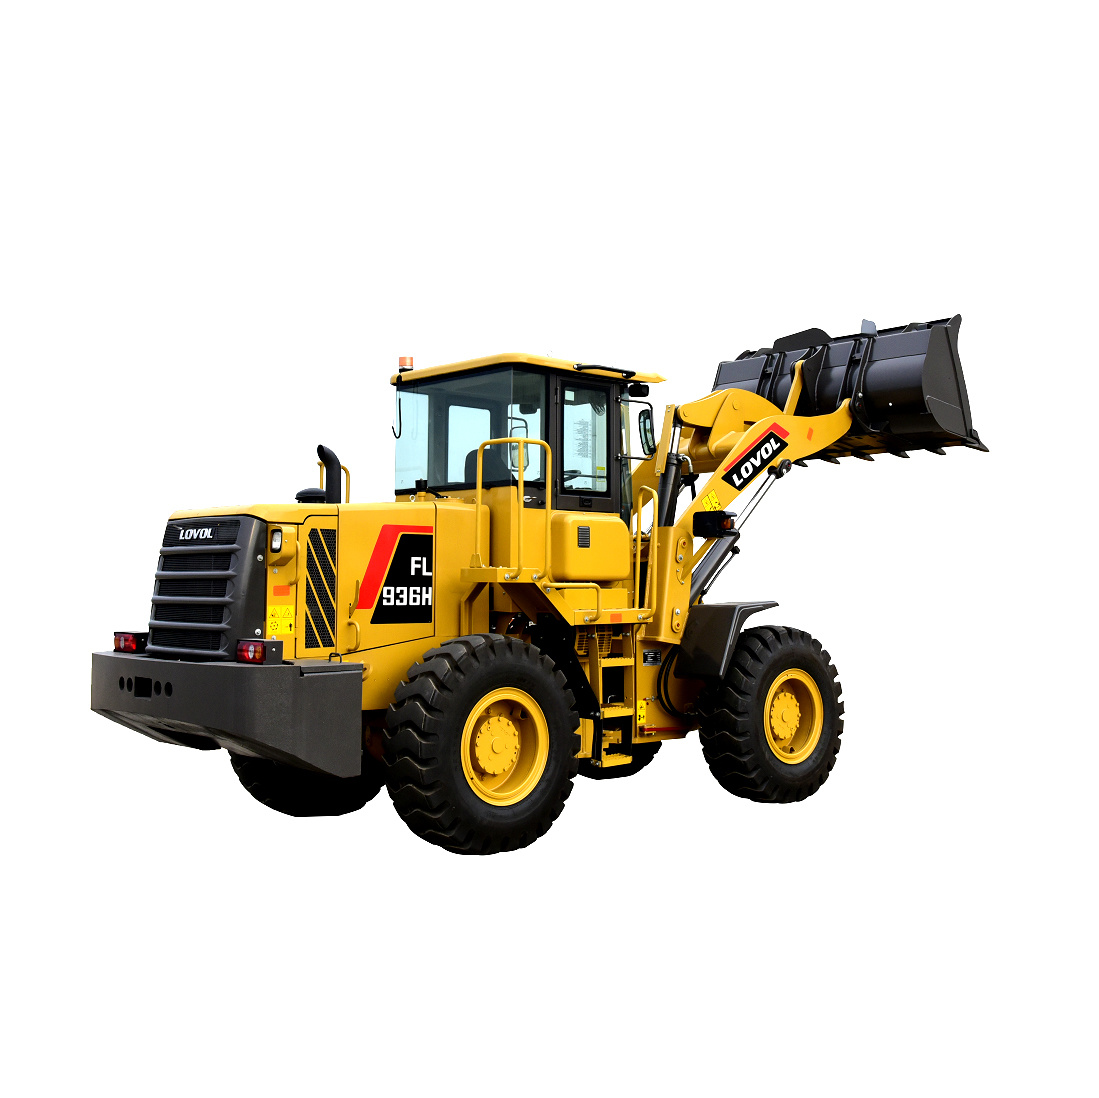 Foton Lovol 3ton 2m3 FL936h Small Front Wheel Loader with Pallet Fork